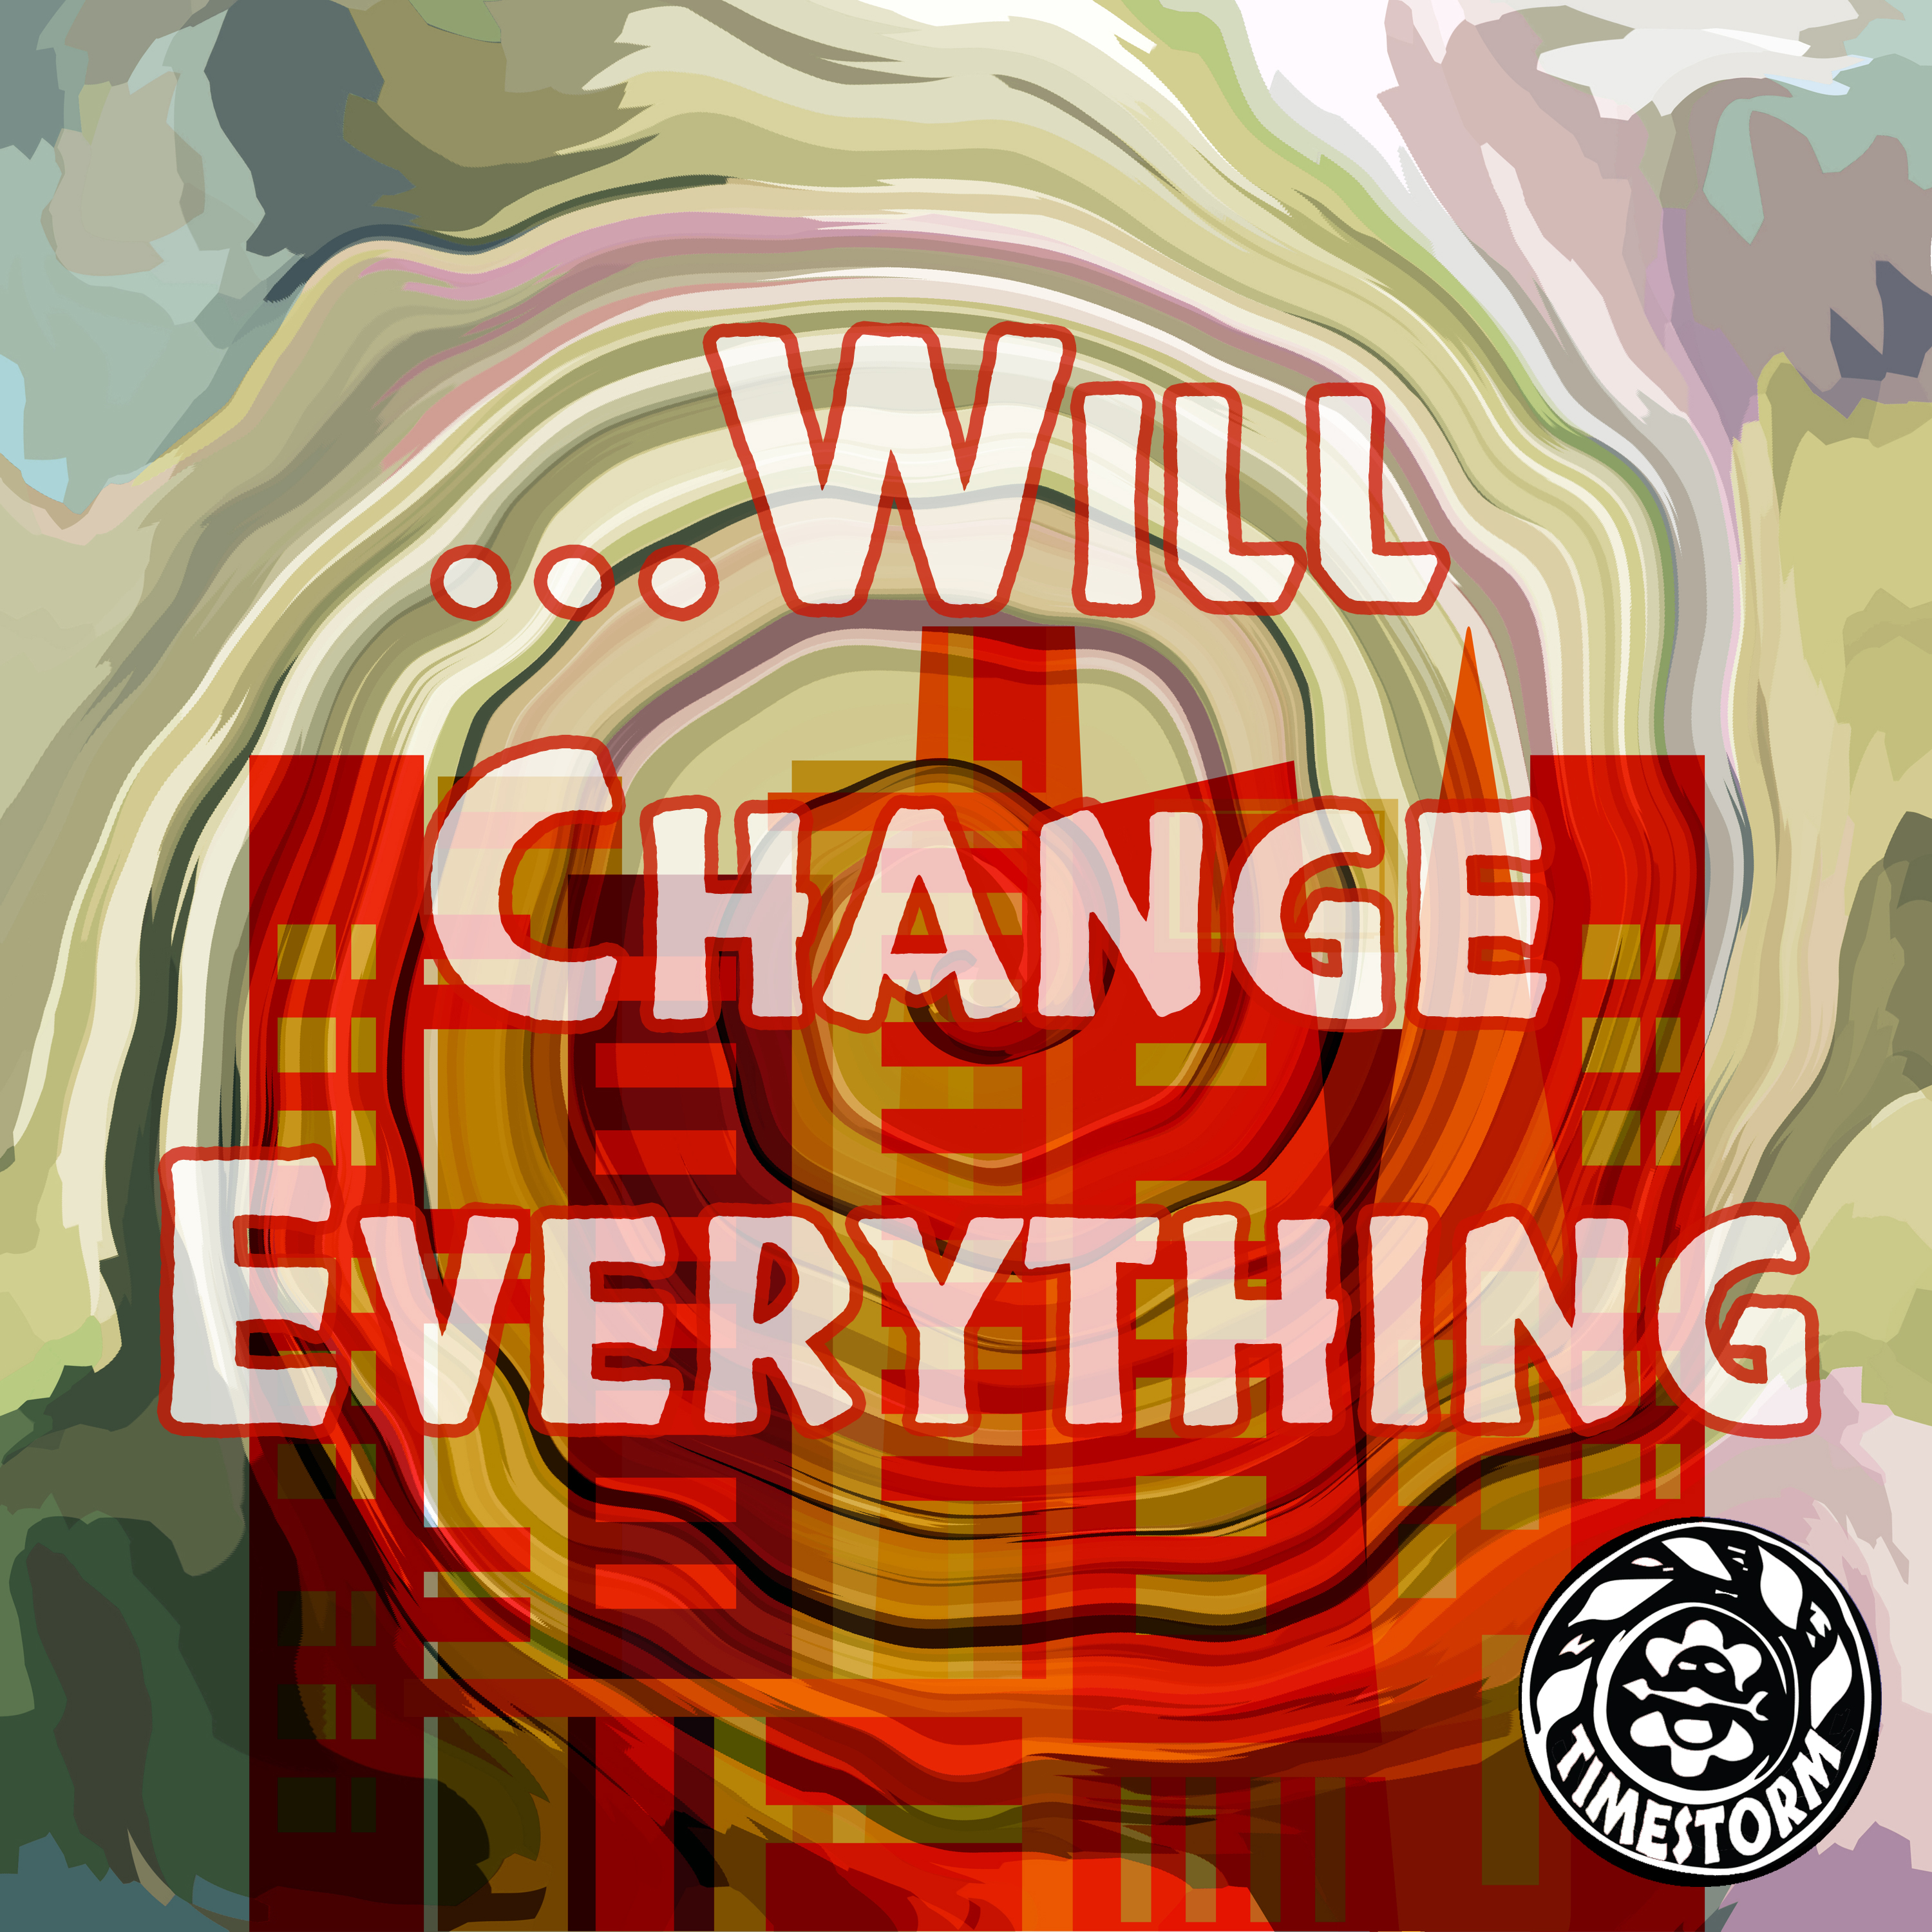 Episode 2: ...Will Change Everything